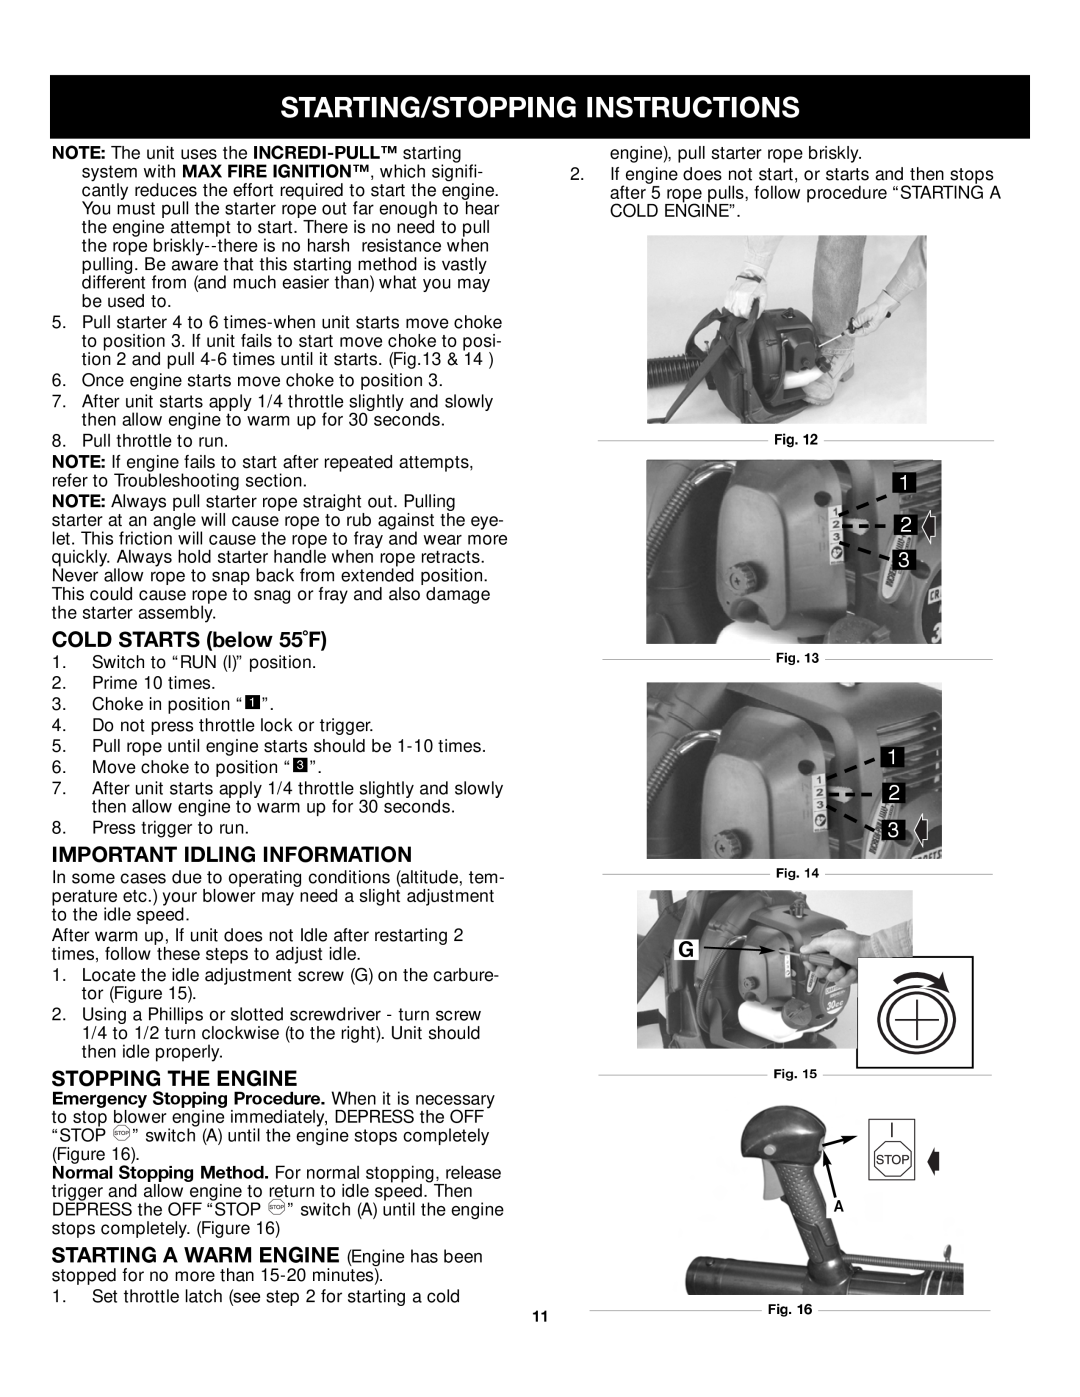 Craftsman 316.79499 manual COLD STARTS below 55˚F, Important Idling Information, Stopping The Engine 